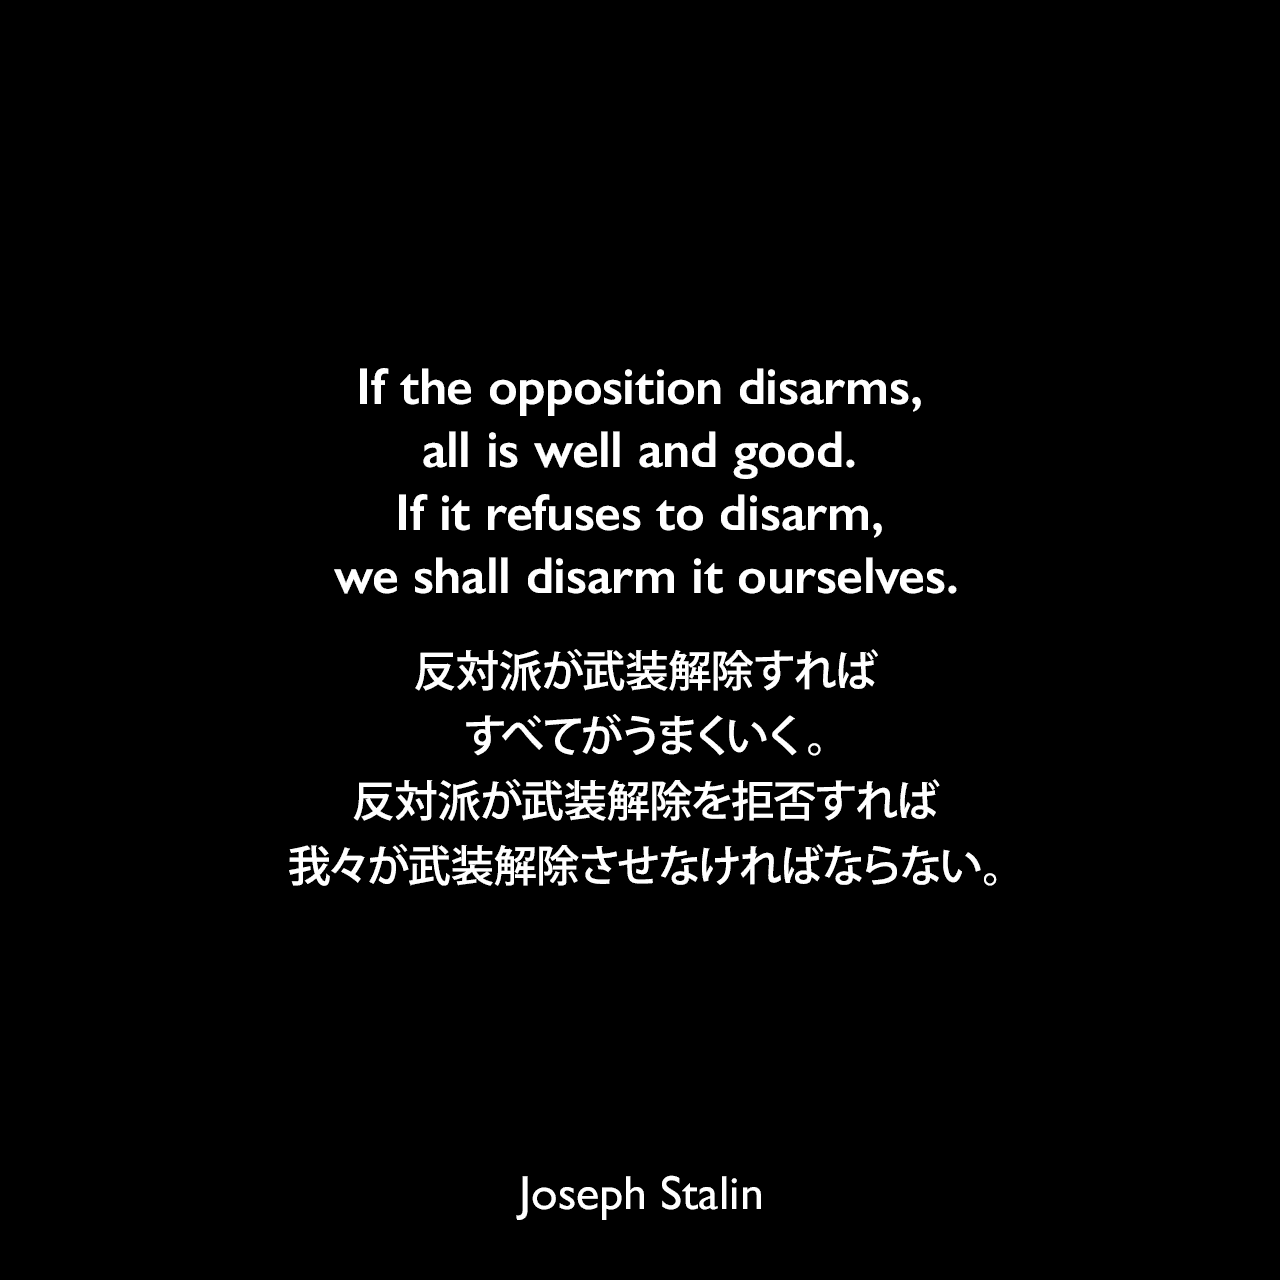 If the opposition disarms, all is well and good. If it refuses to disarm, we shall disarm it ourselves.反対派が武装解除すればすべてがうまくいく。反対派が武装解除を拒否すれば我々が武装解除させなければならない。- 1927年12月7日 ソビエト連邦中央委員会の政治報告よりJoseph Stalin